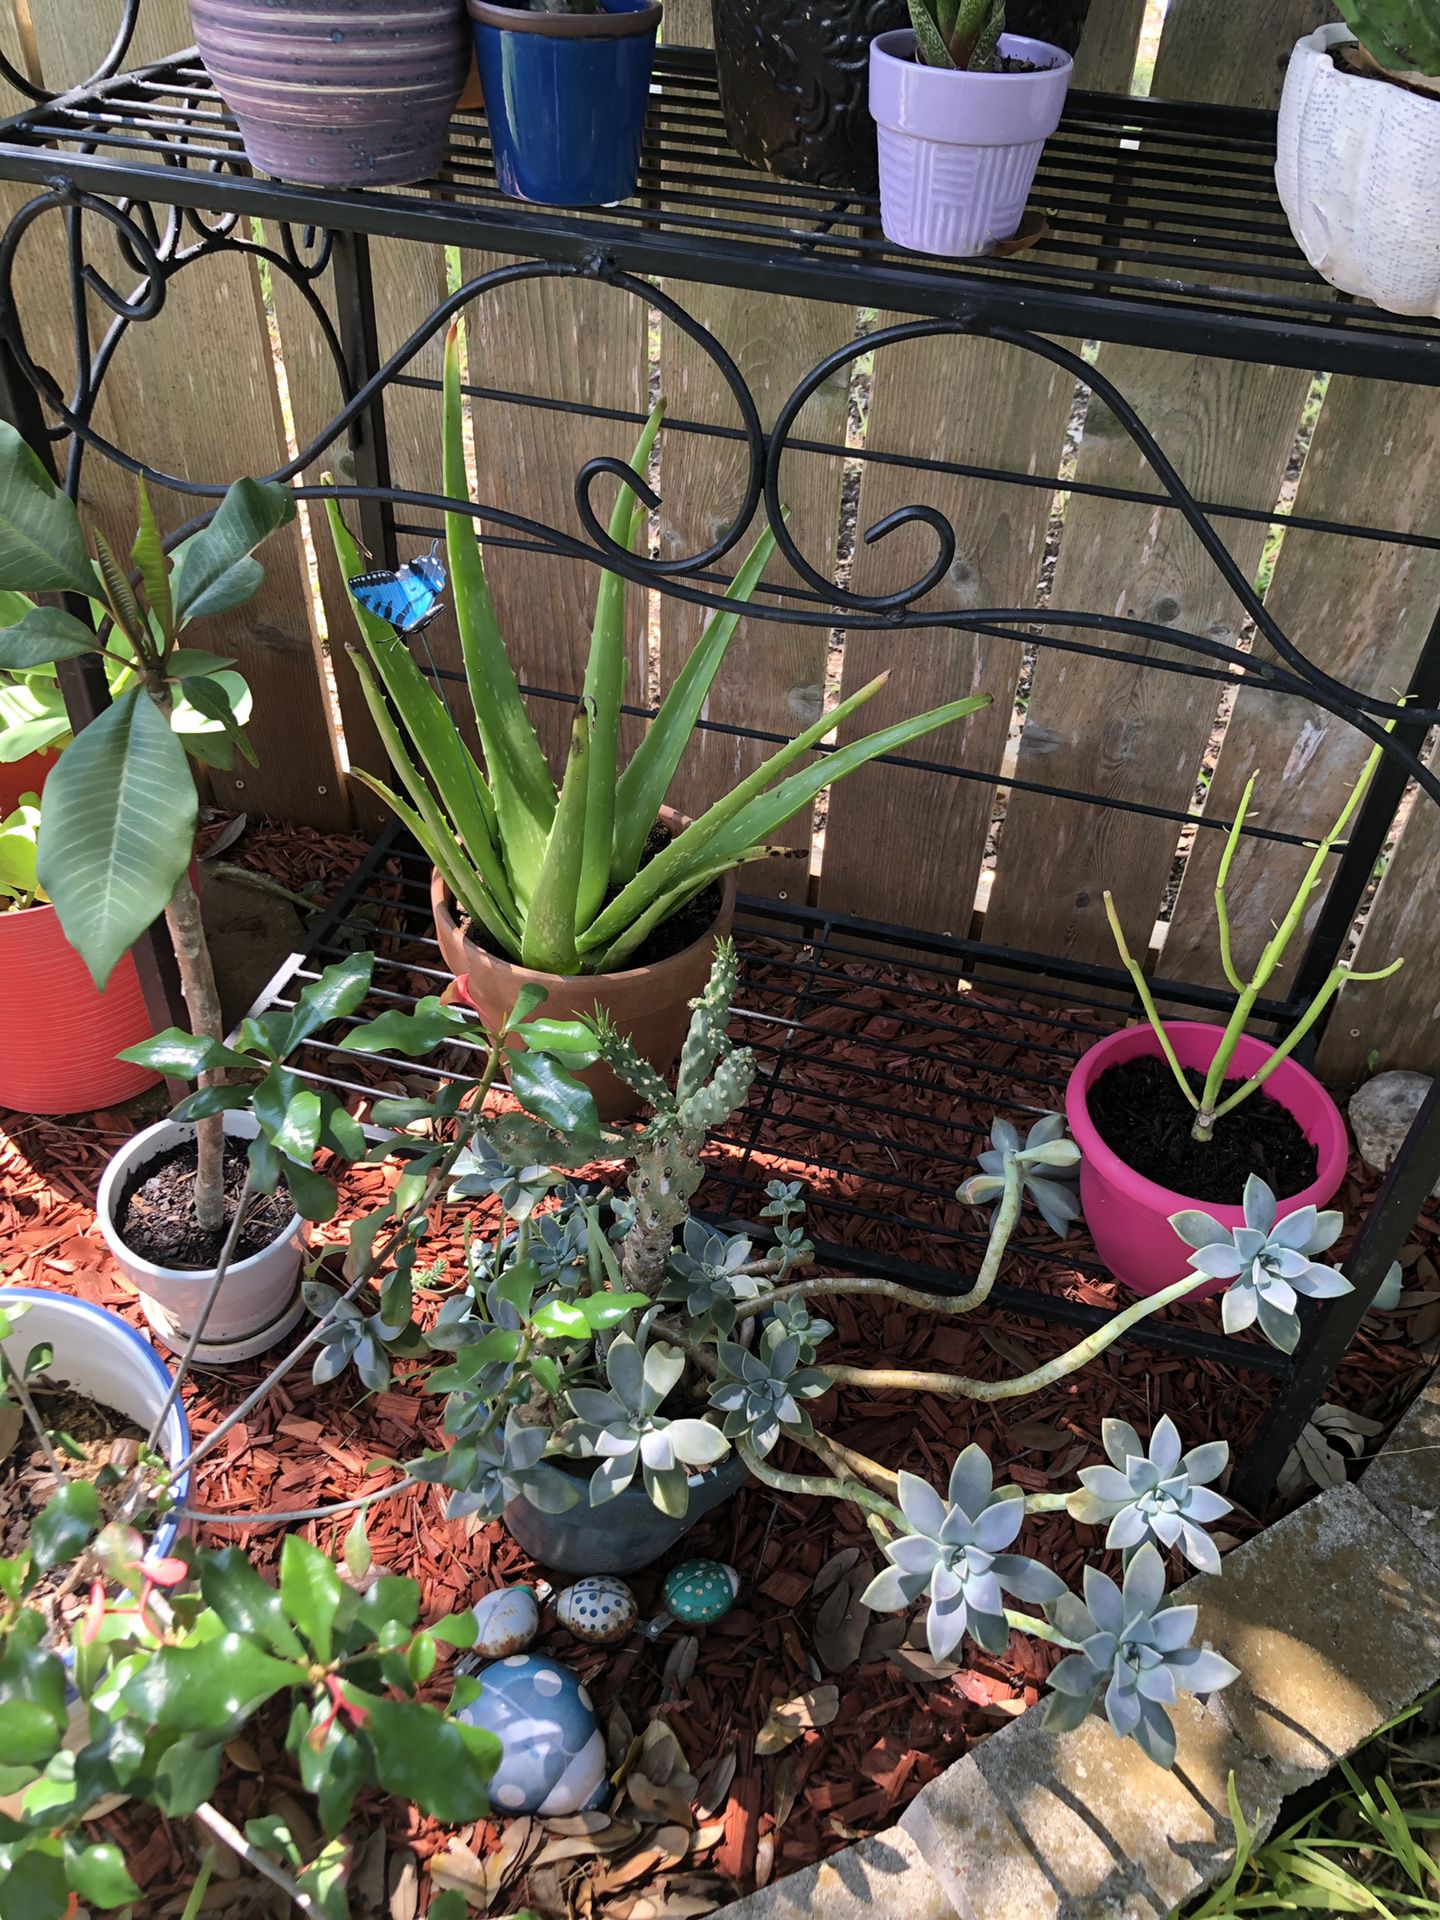 Crown of thorns, flower pot with ghost plants, Pencil cactus, Aloe Vera, plumeria all 5 $65